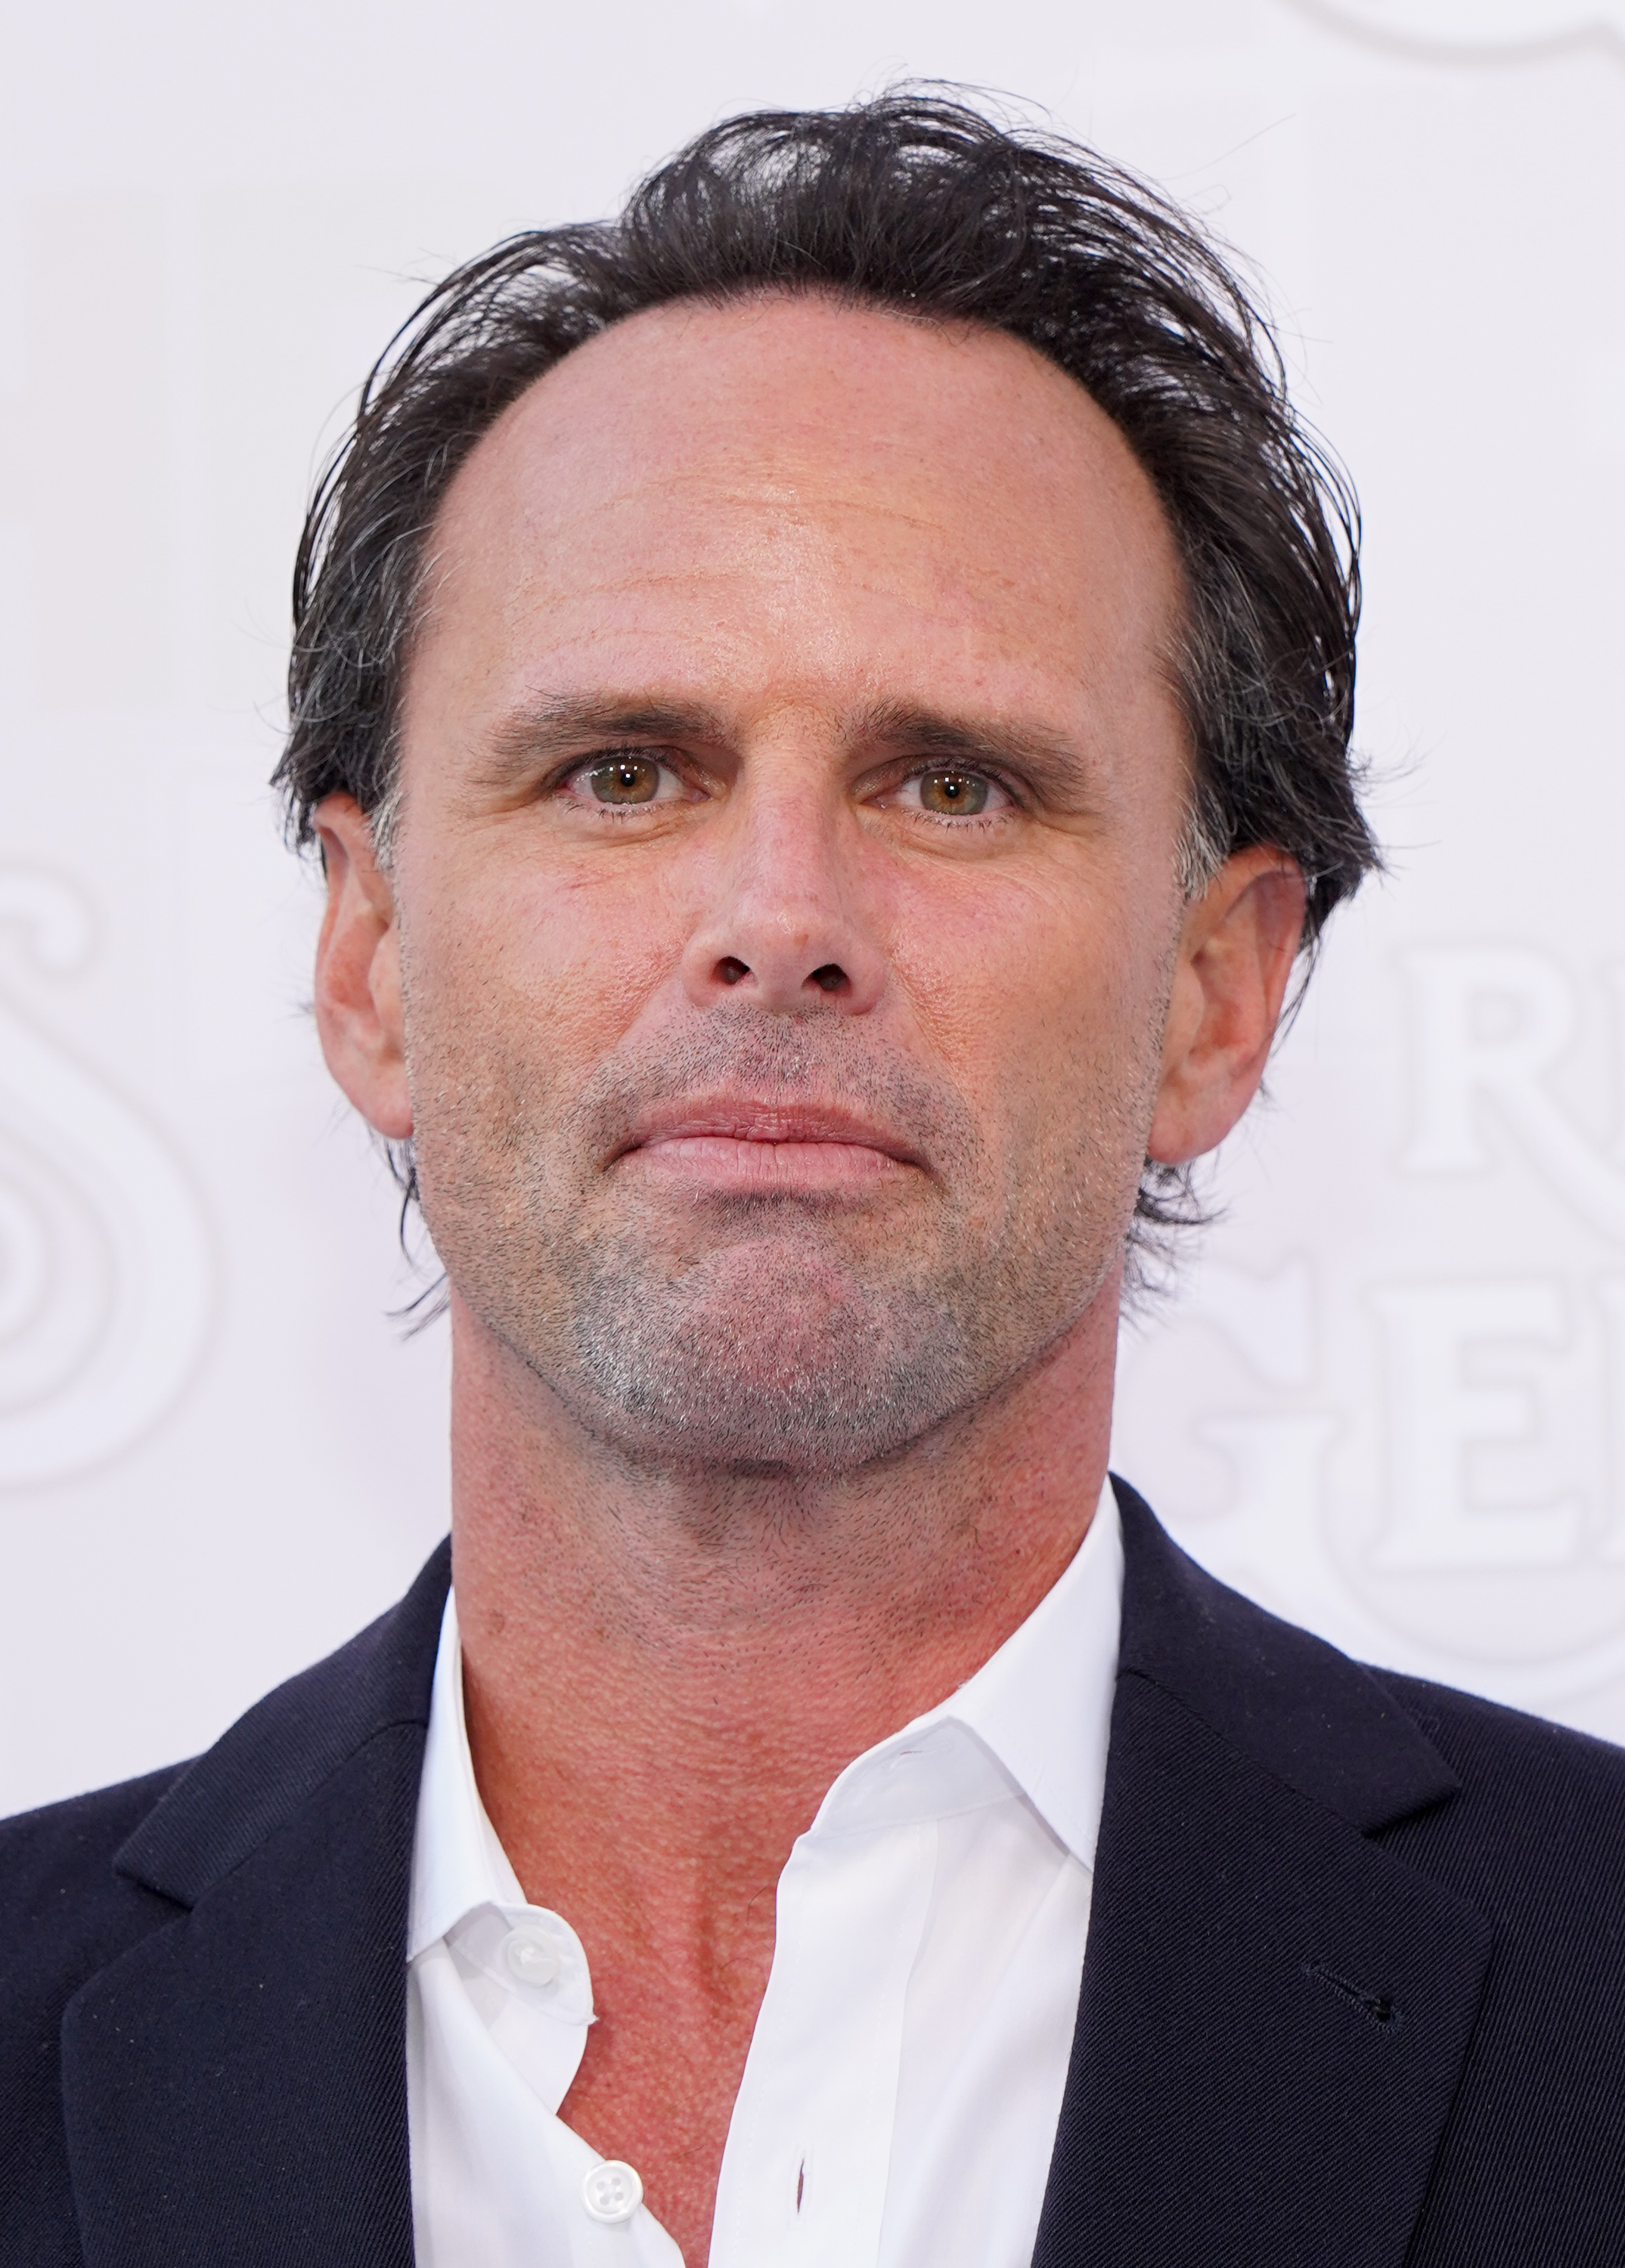 Walton Goggins attends the Los Angeles premiere of the new HBO series "The Righteous Gemstones" at Paramount Studios on July 25, 2019, in Hollywood, California. | Source: Getty Images